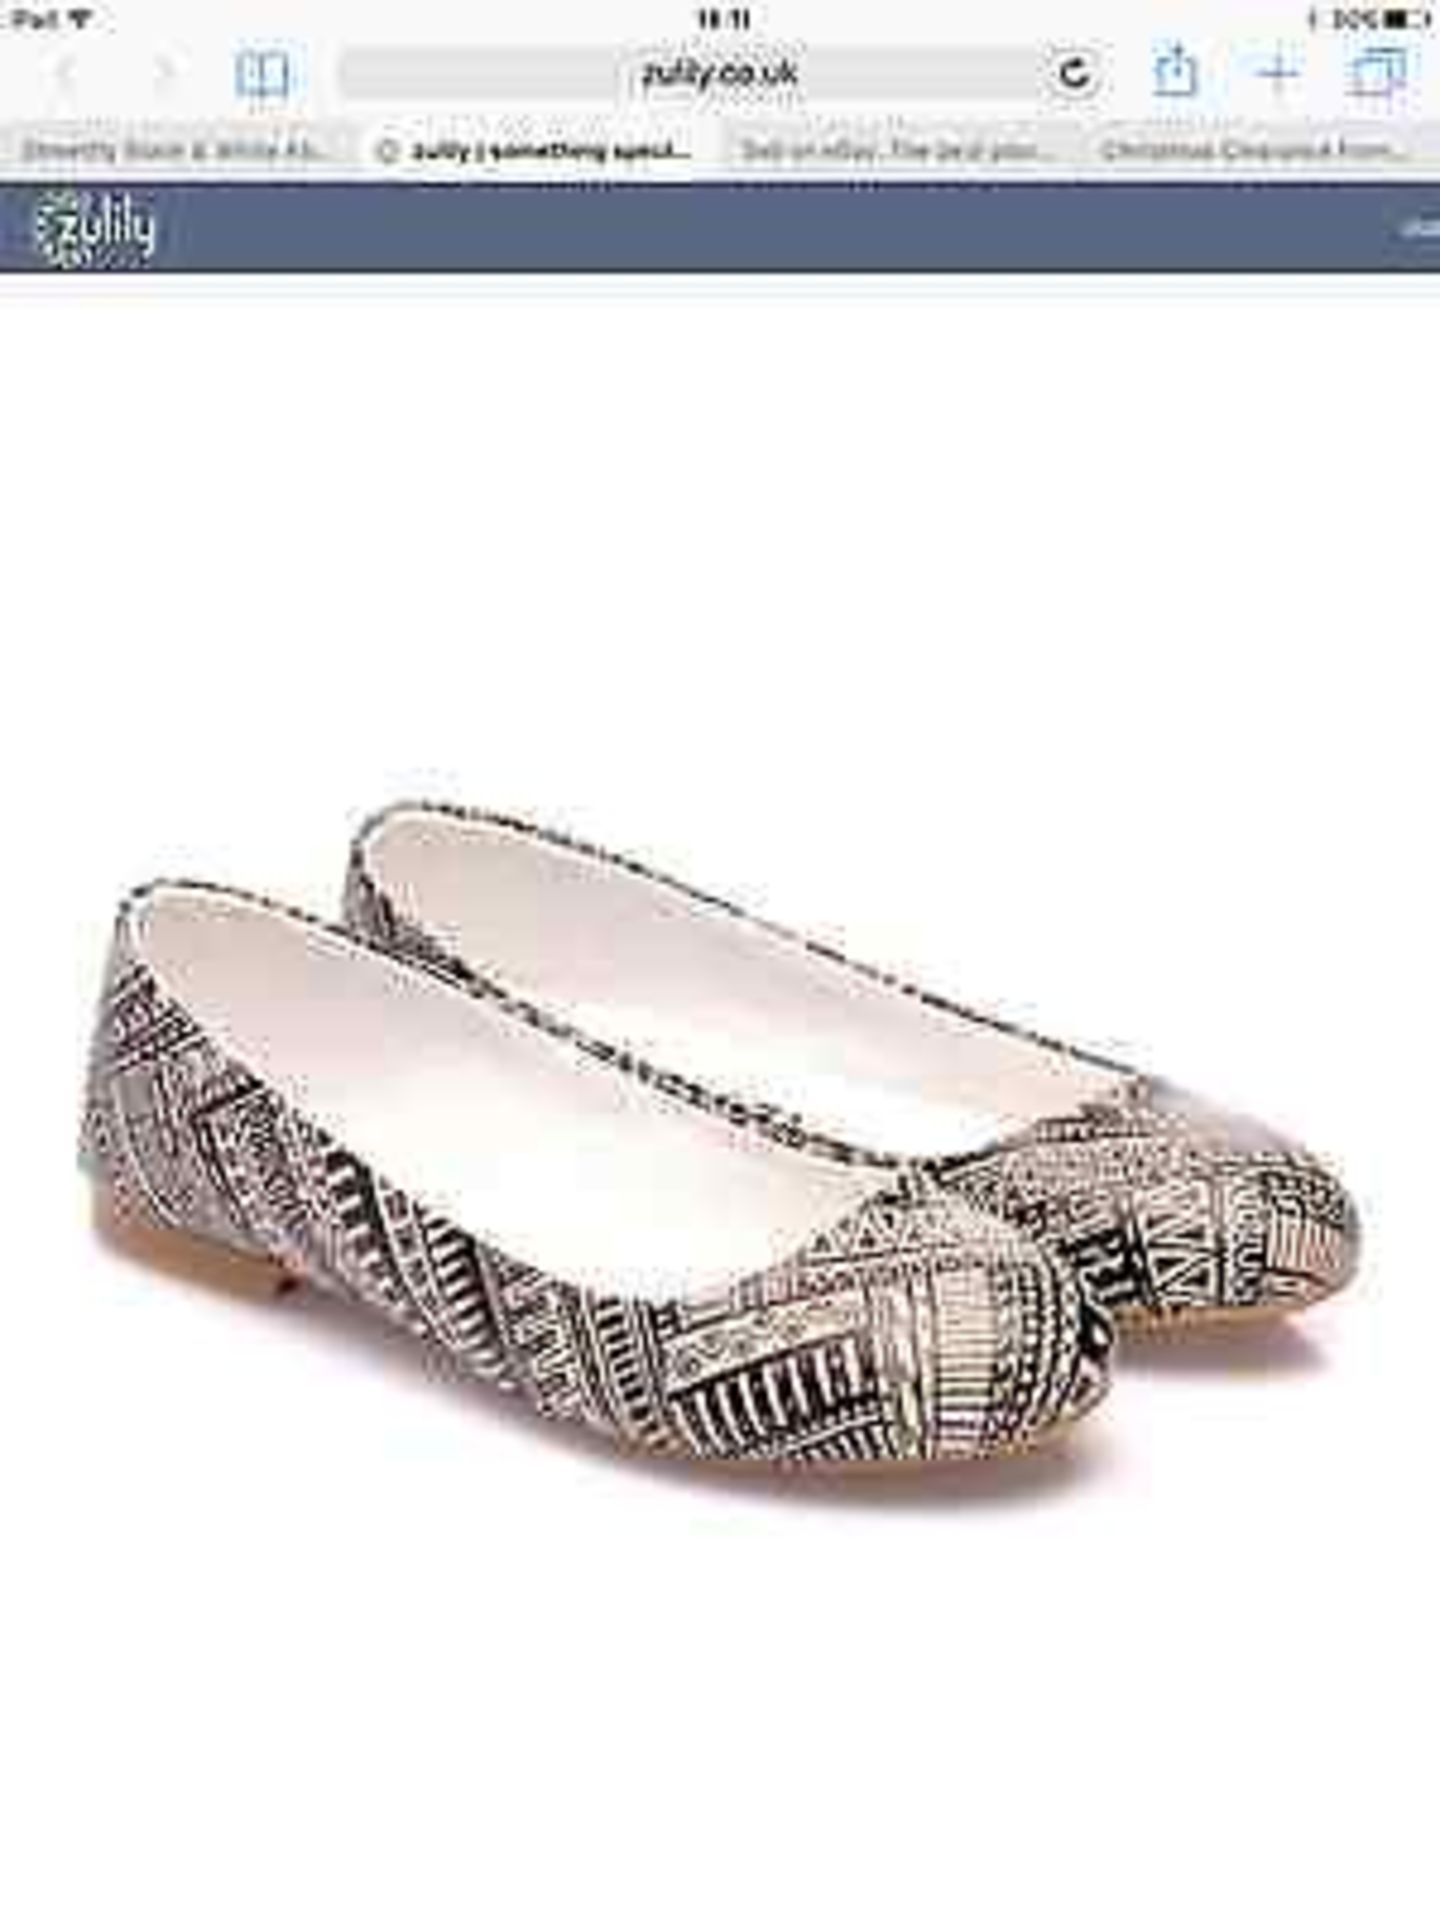 Streetfly Black & White Abstract Ballet Flat, Size UUe 41, RRP £112.99 (New with box)